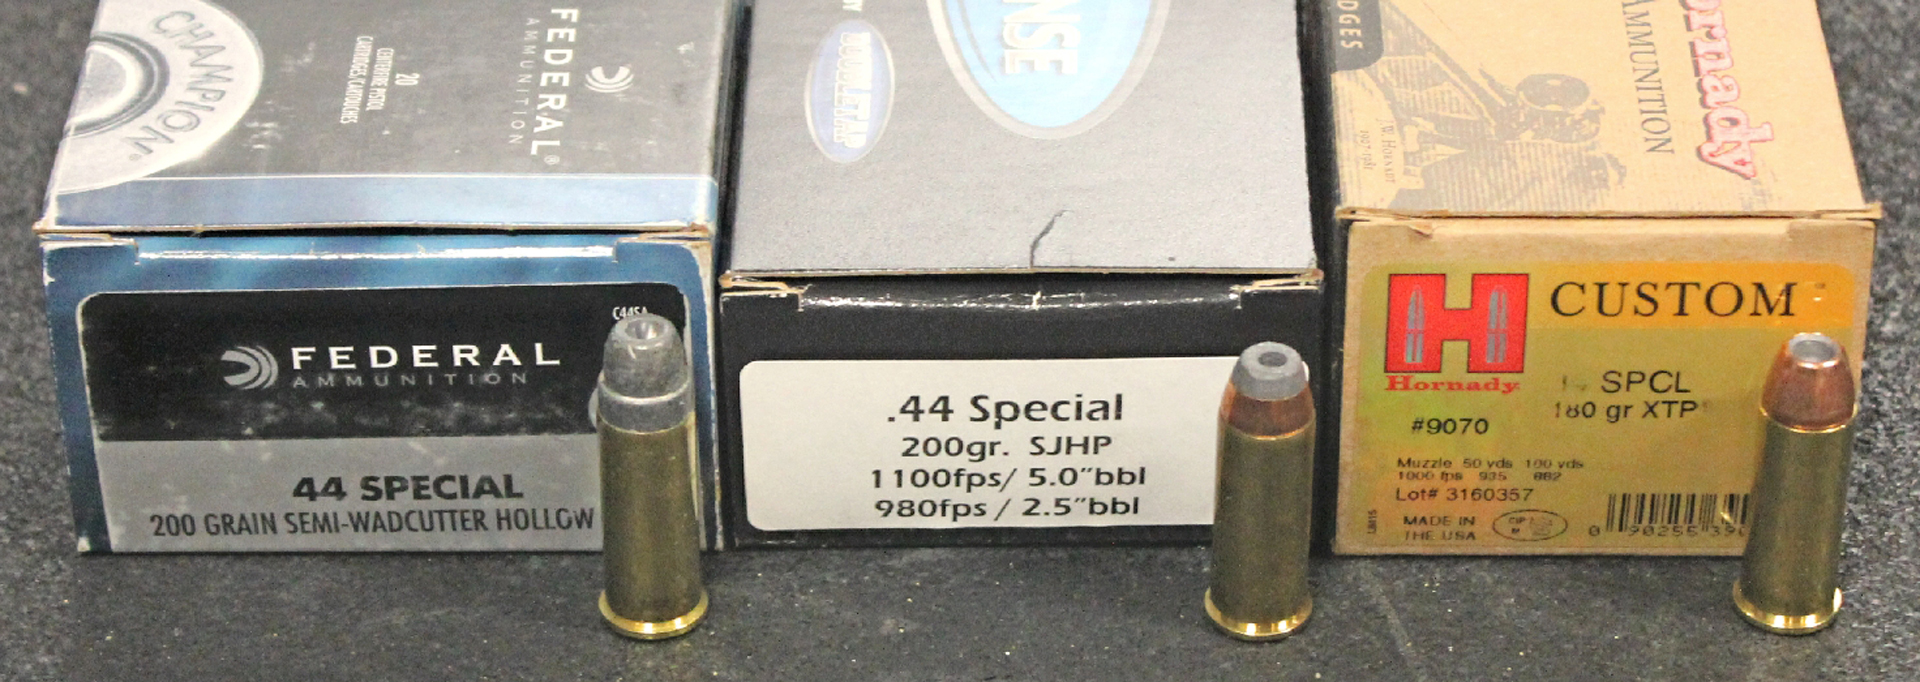 three ammunition boxes of .44 Special federal double tap hornady